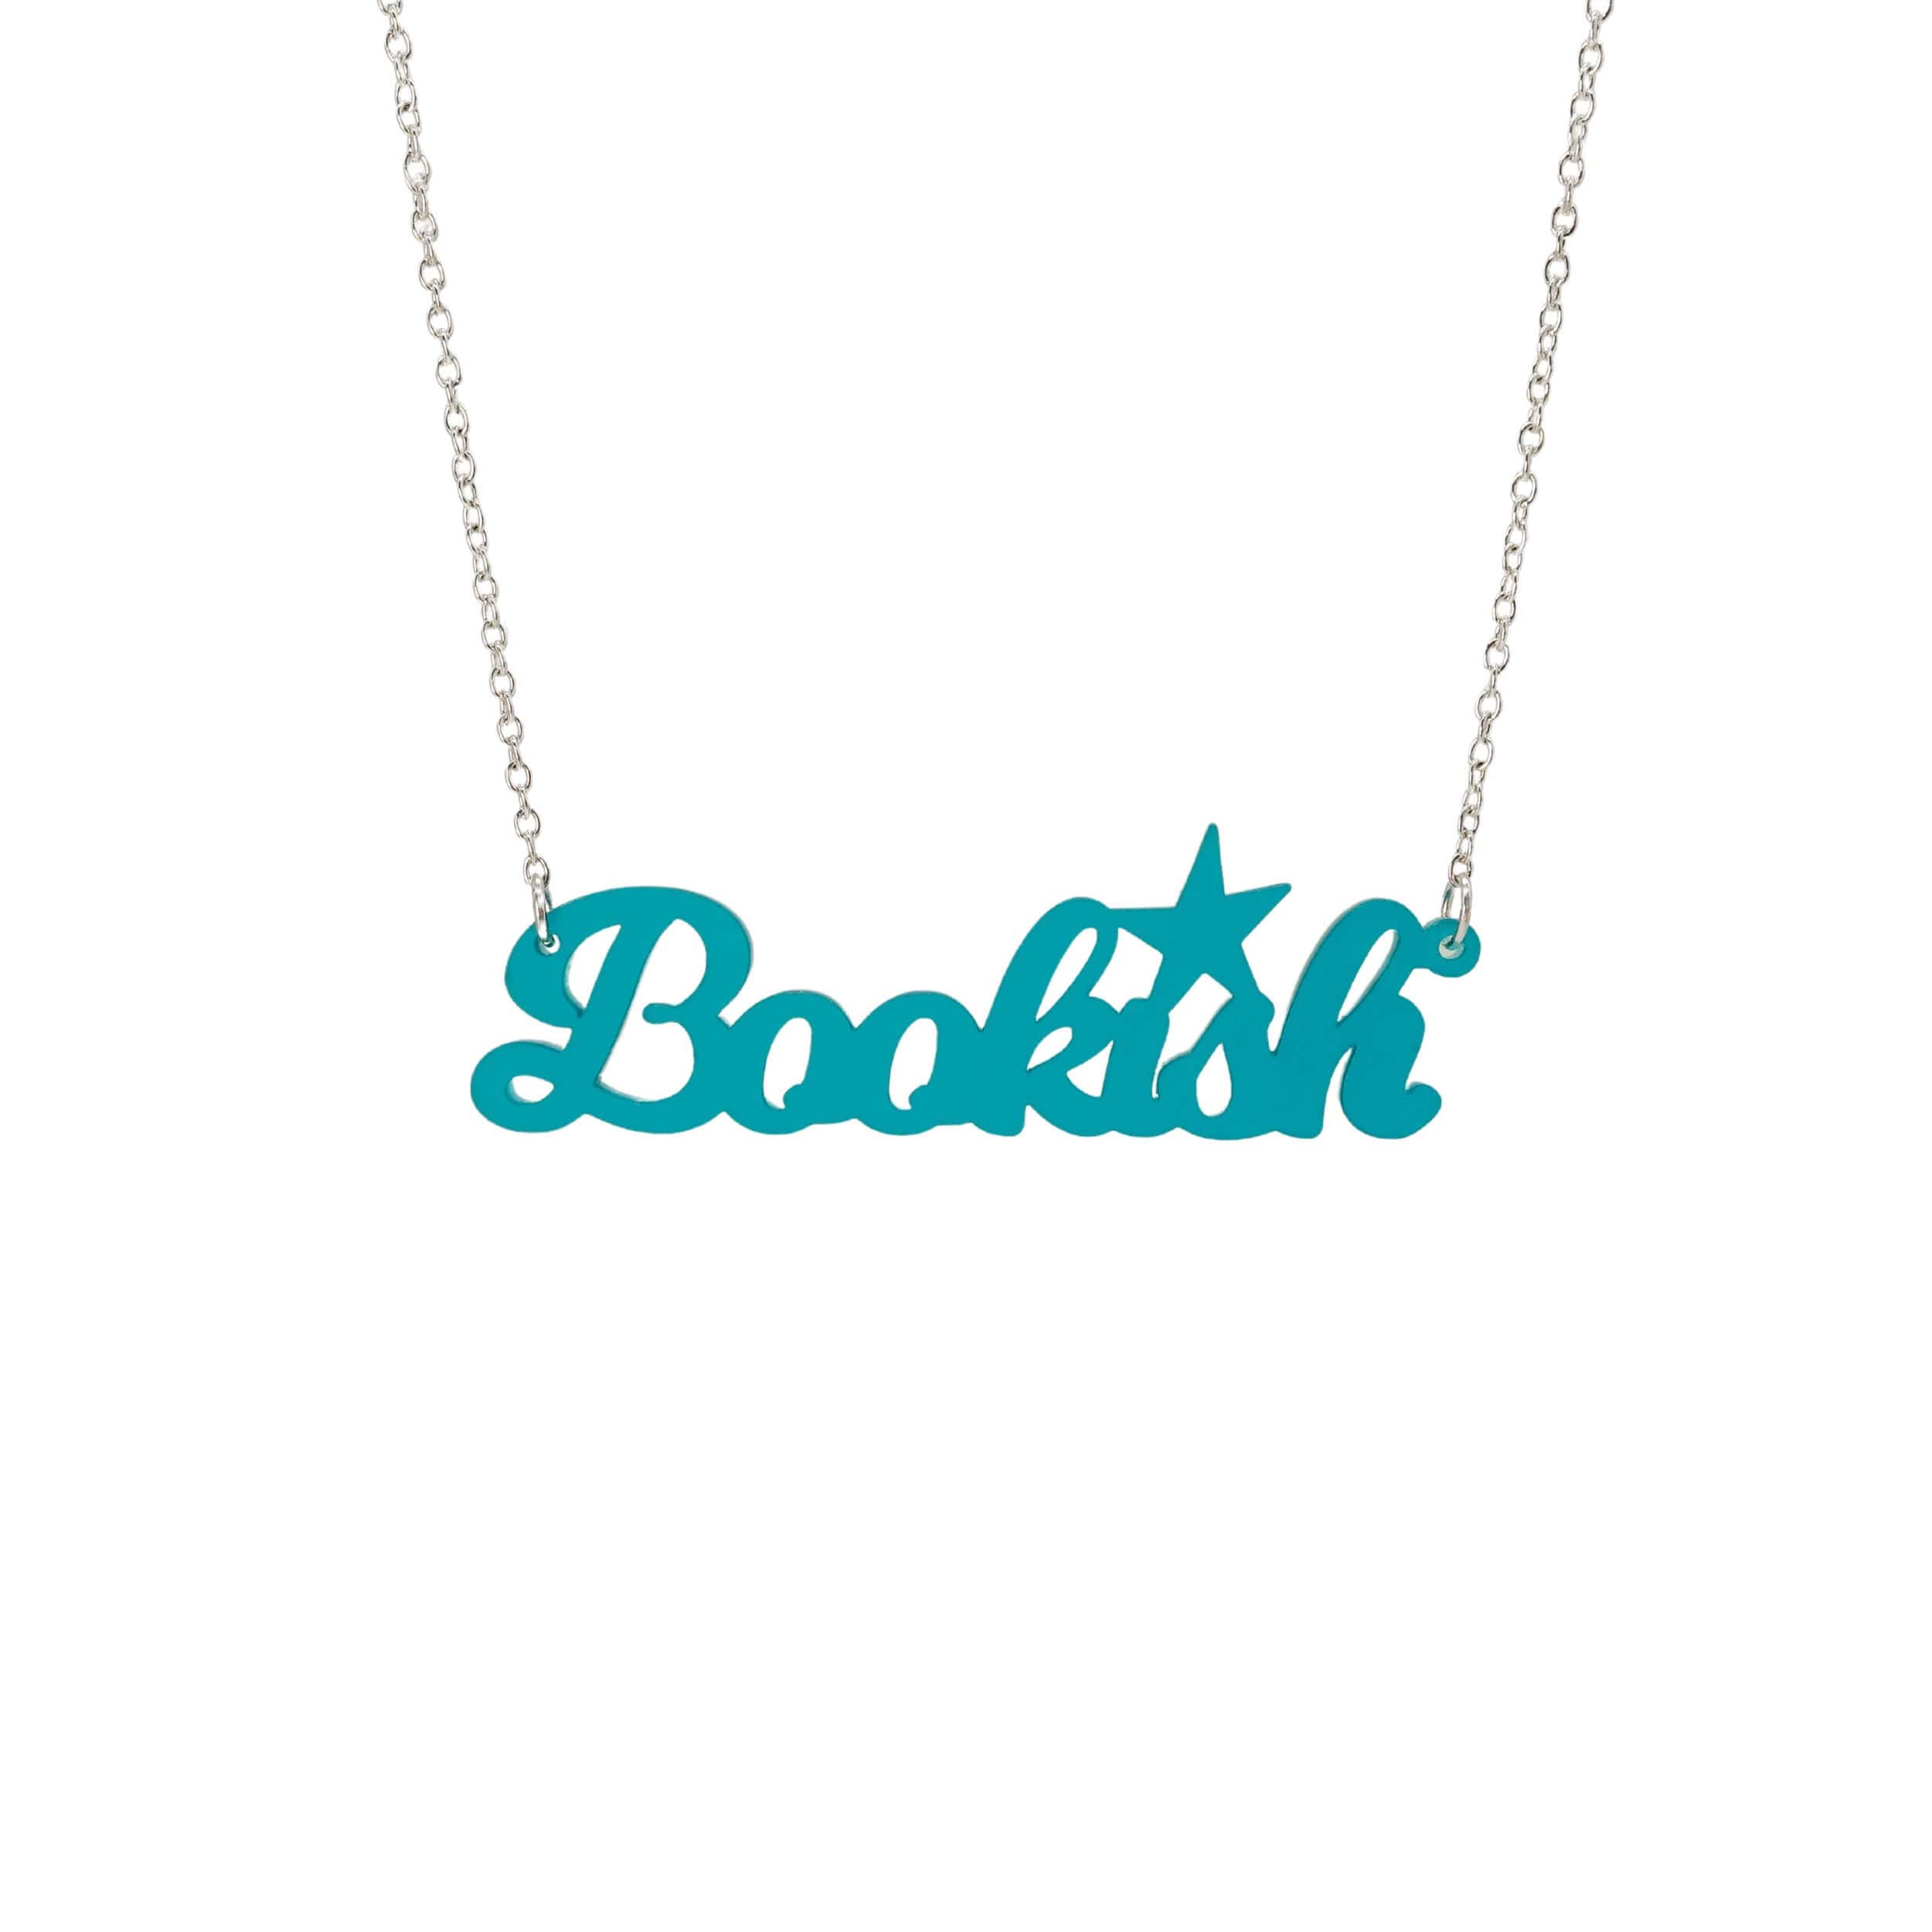 Teal frost Bookish necklace shown against a white background. 